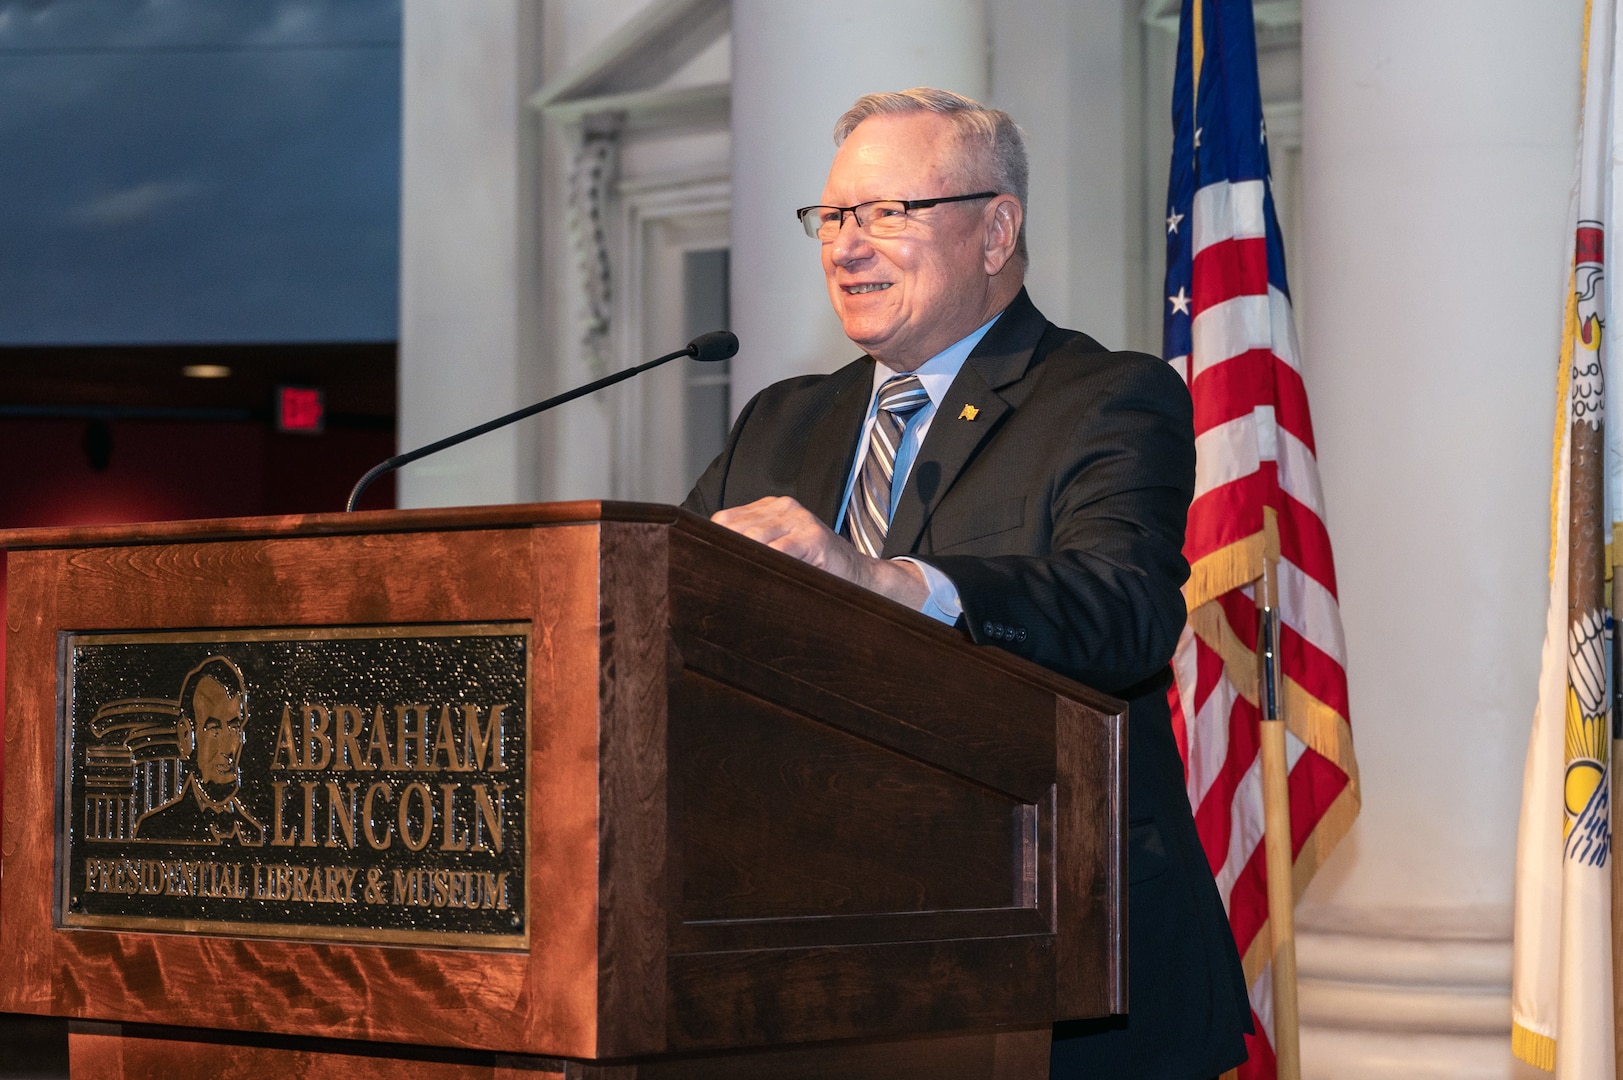 Retired U.S. Army Gen. Frank Grass, the 27th chief of the National Guard Bureau, speaks during the Illinois National Guard's 300th anniversary gala at in the Abraham Lincoln Presidential Library and Museum in Springfield, Illinois, May 6, 2023.